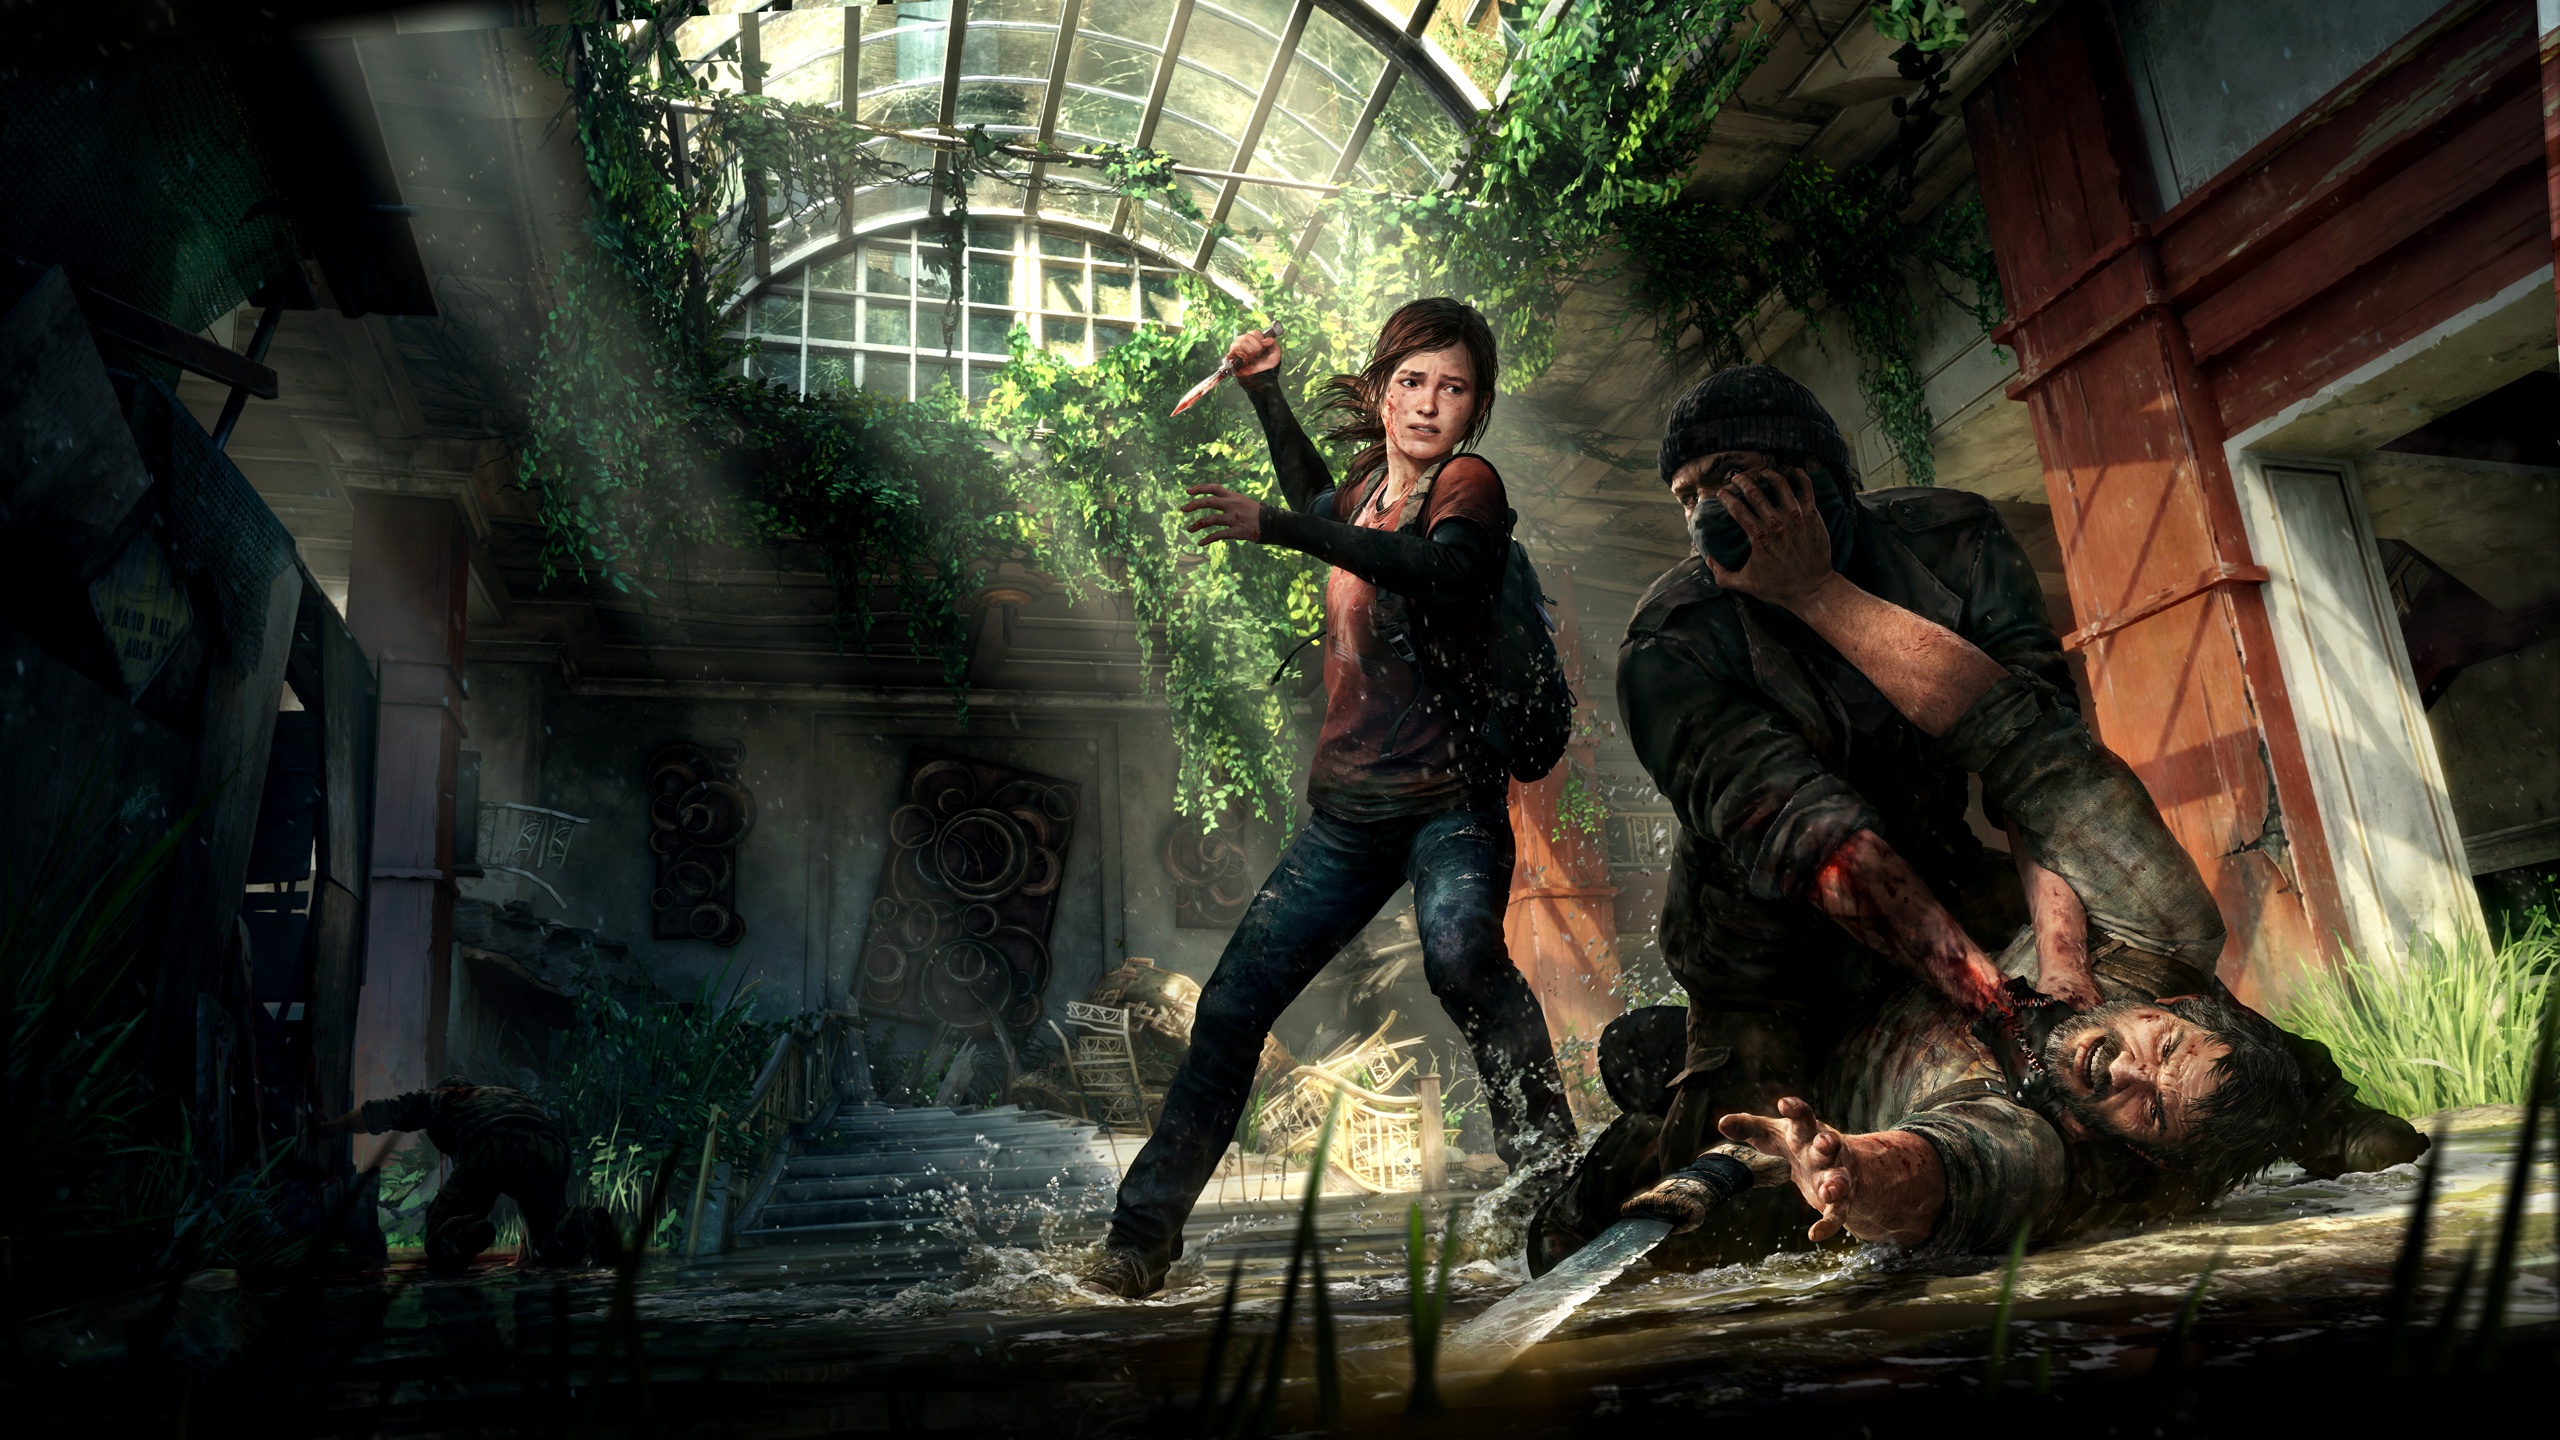 The Last Of Us Ps3 Game Wallpapers In Jpg Format For Free Download